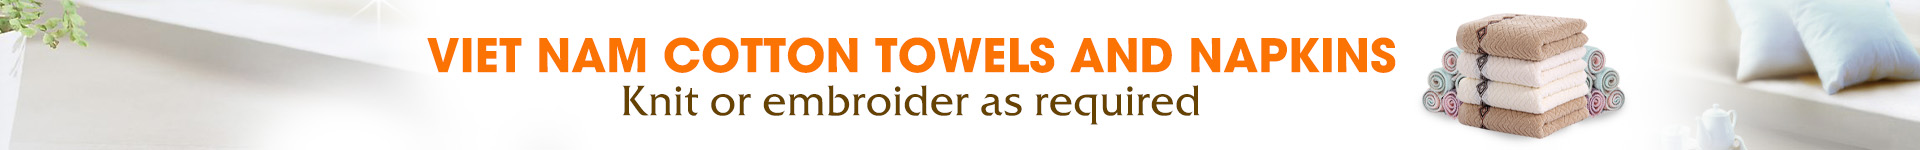 OTHER TOWELS